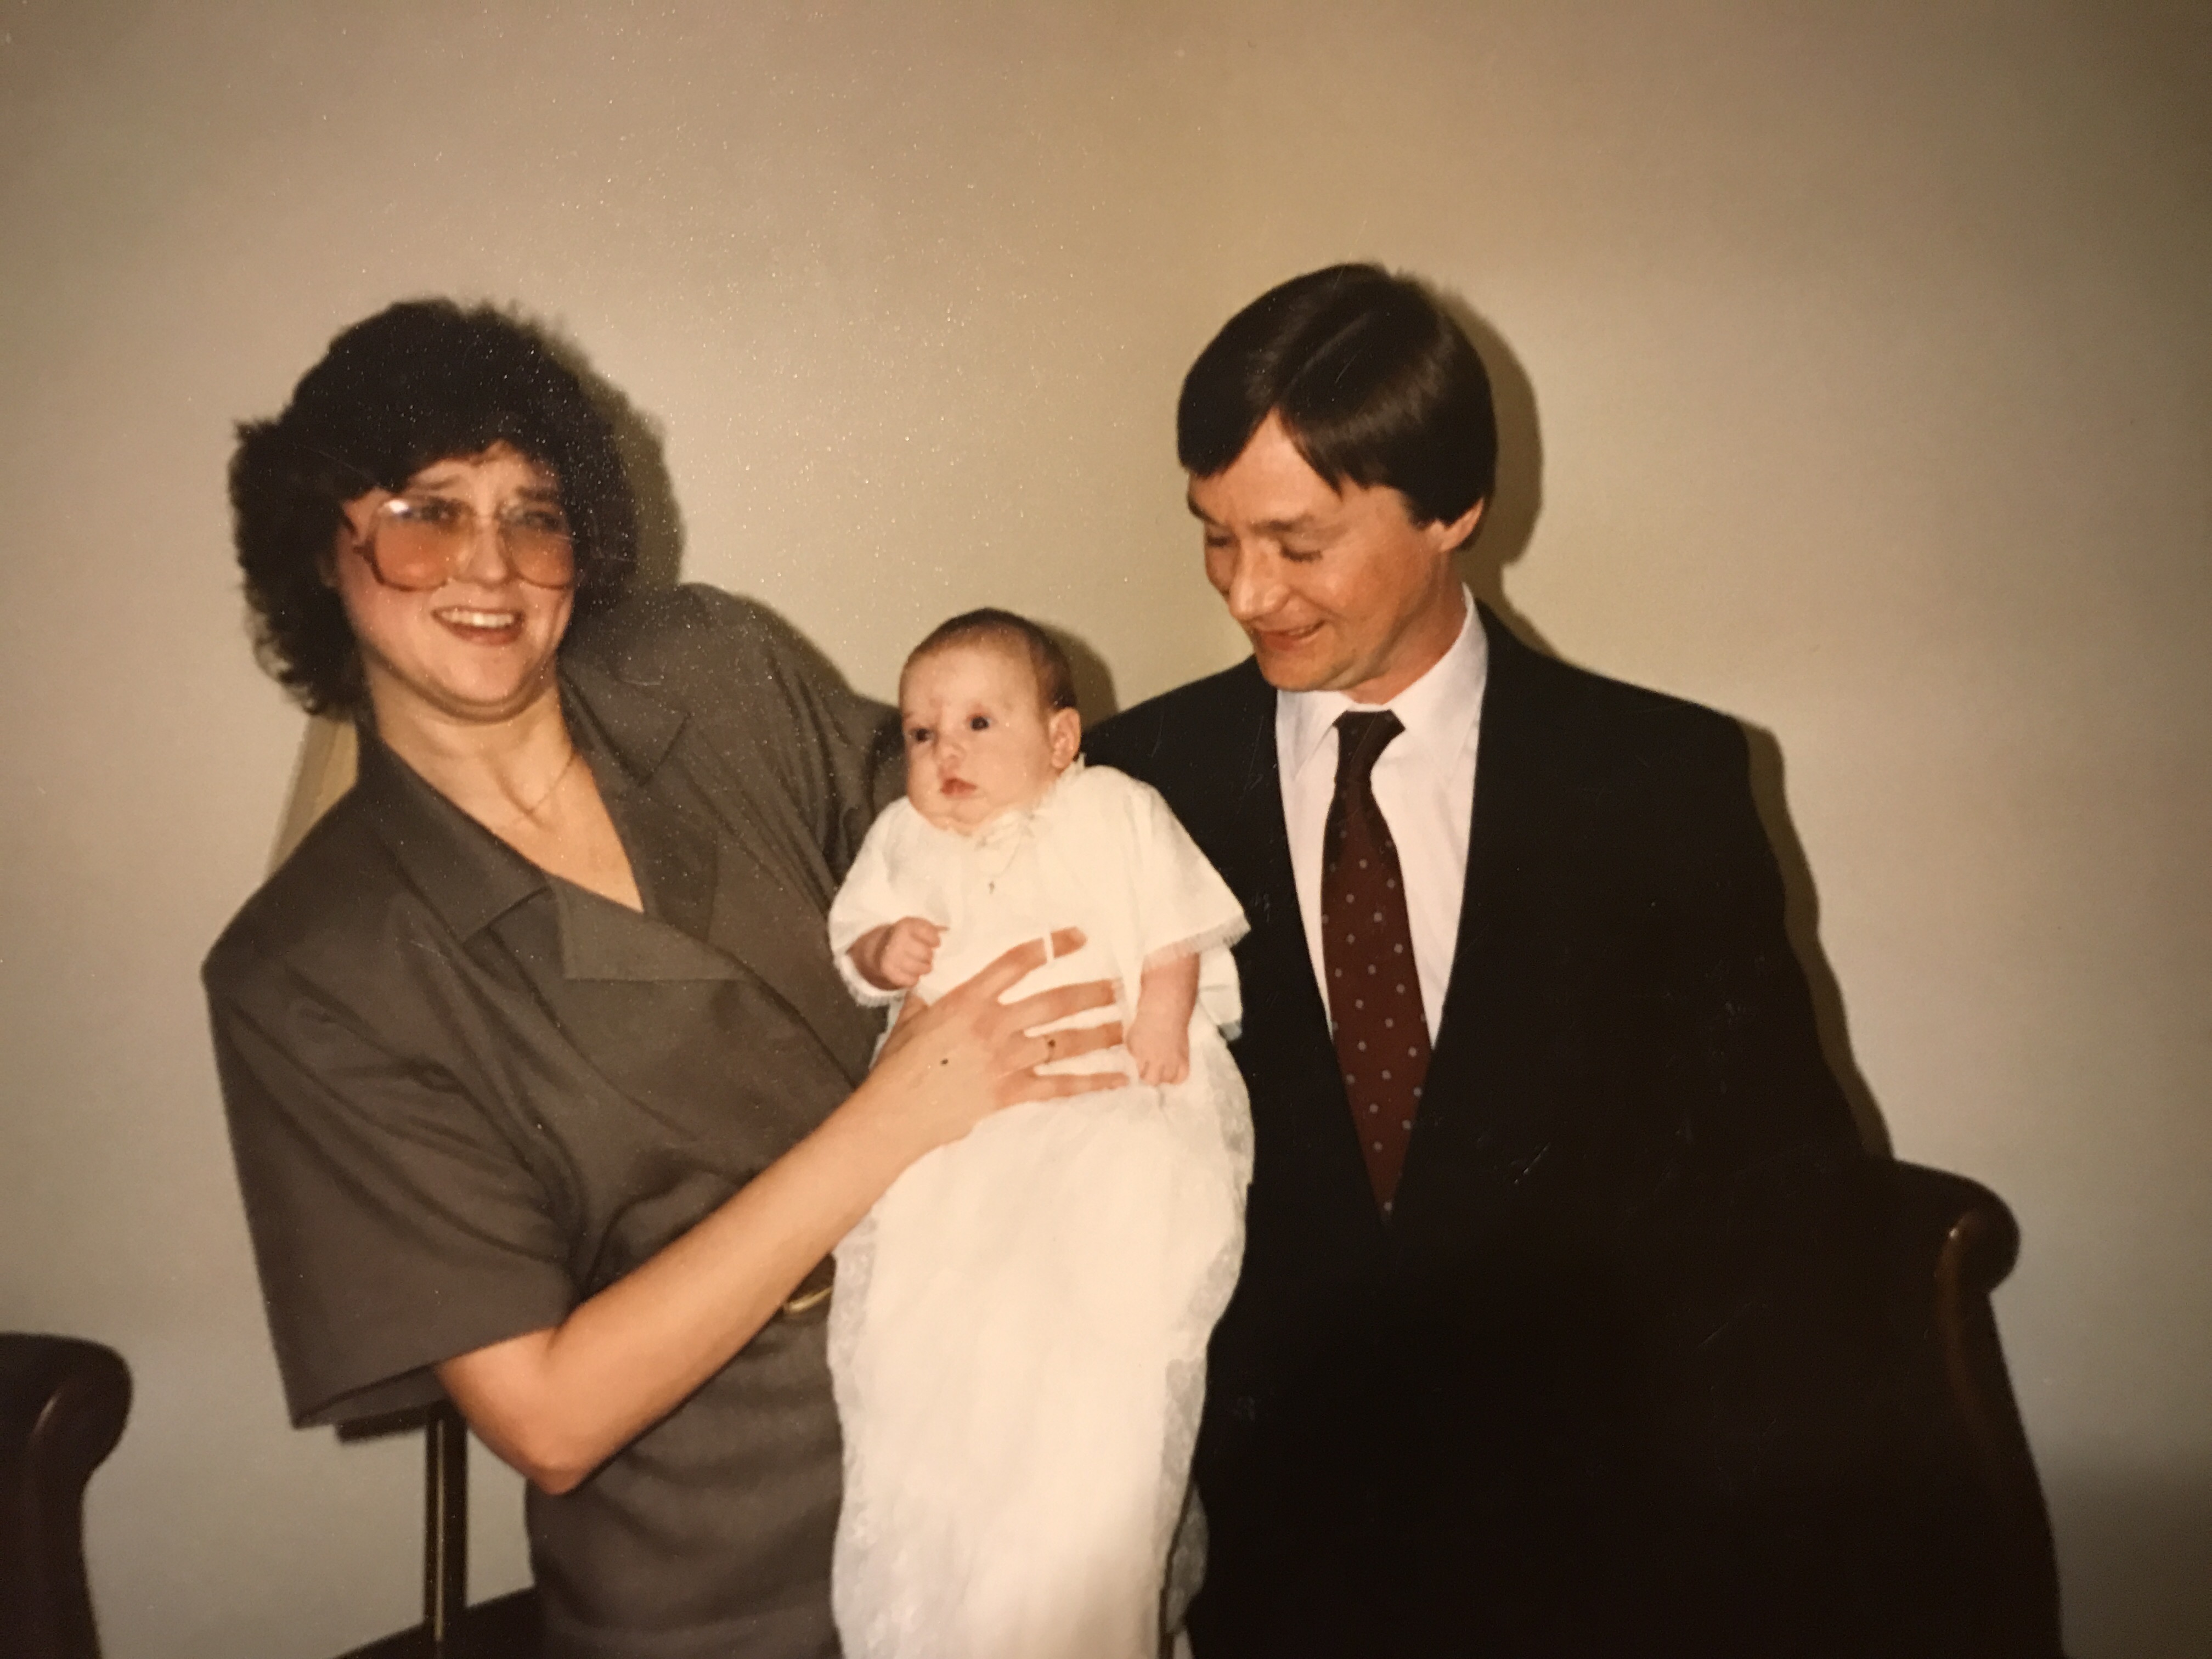 A great photo from my baptism with my godparents. I love how Denis is looking lovingly at me.